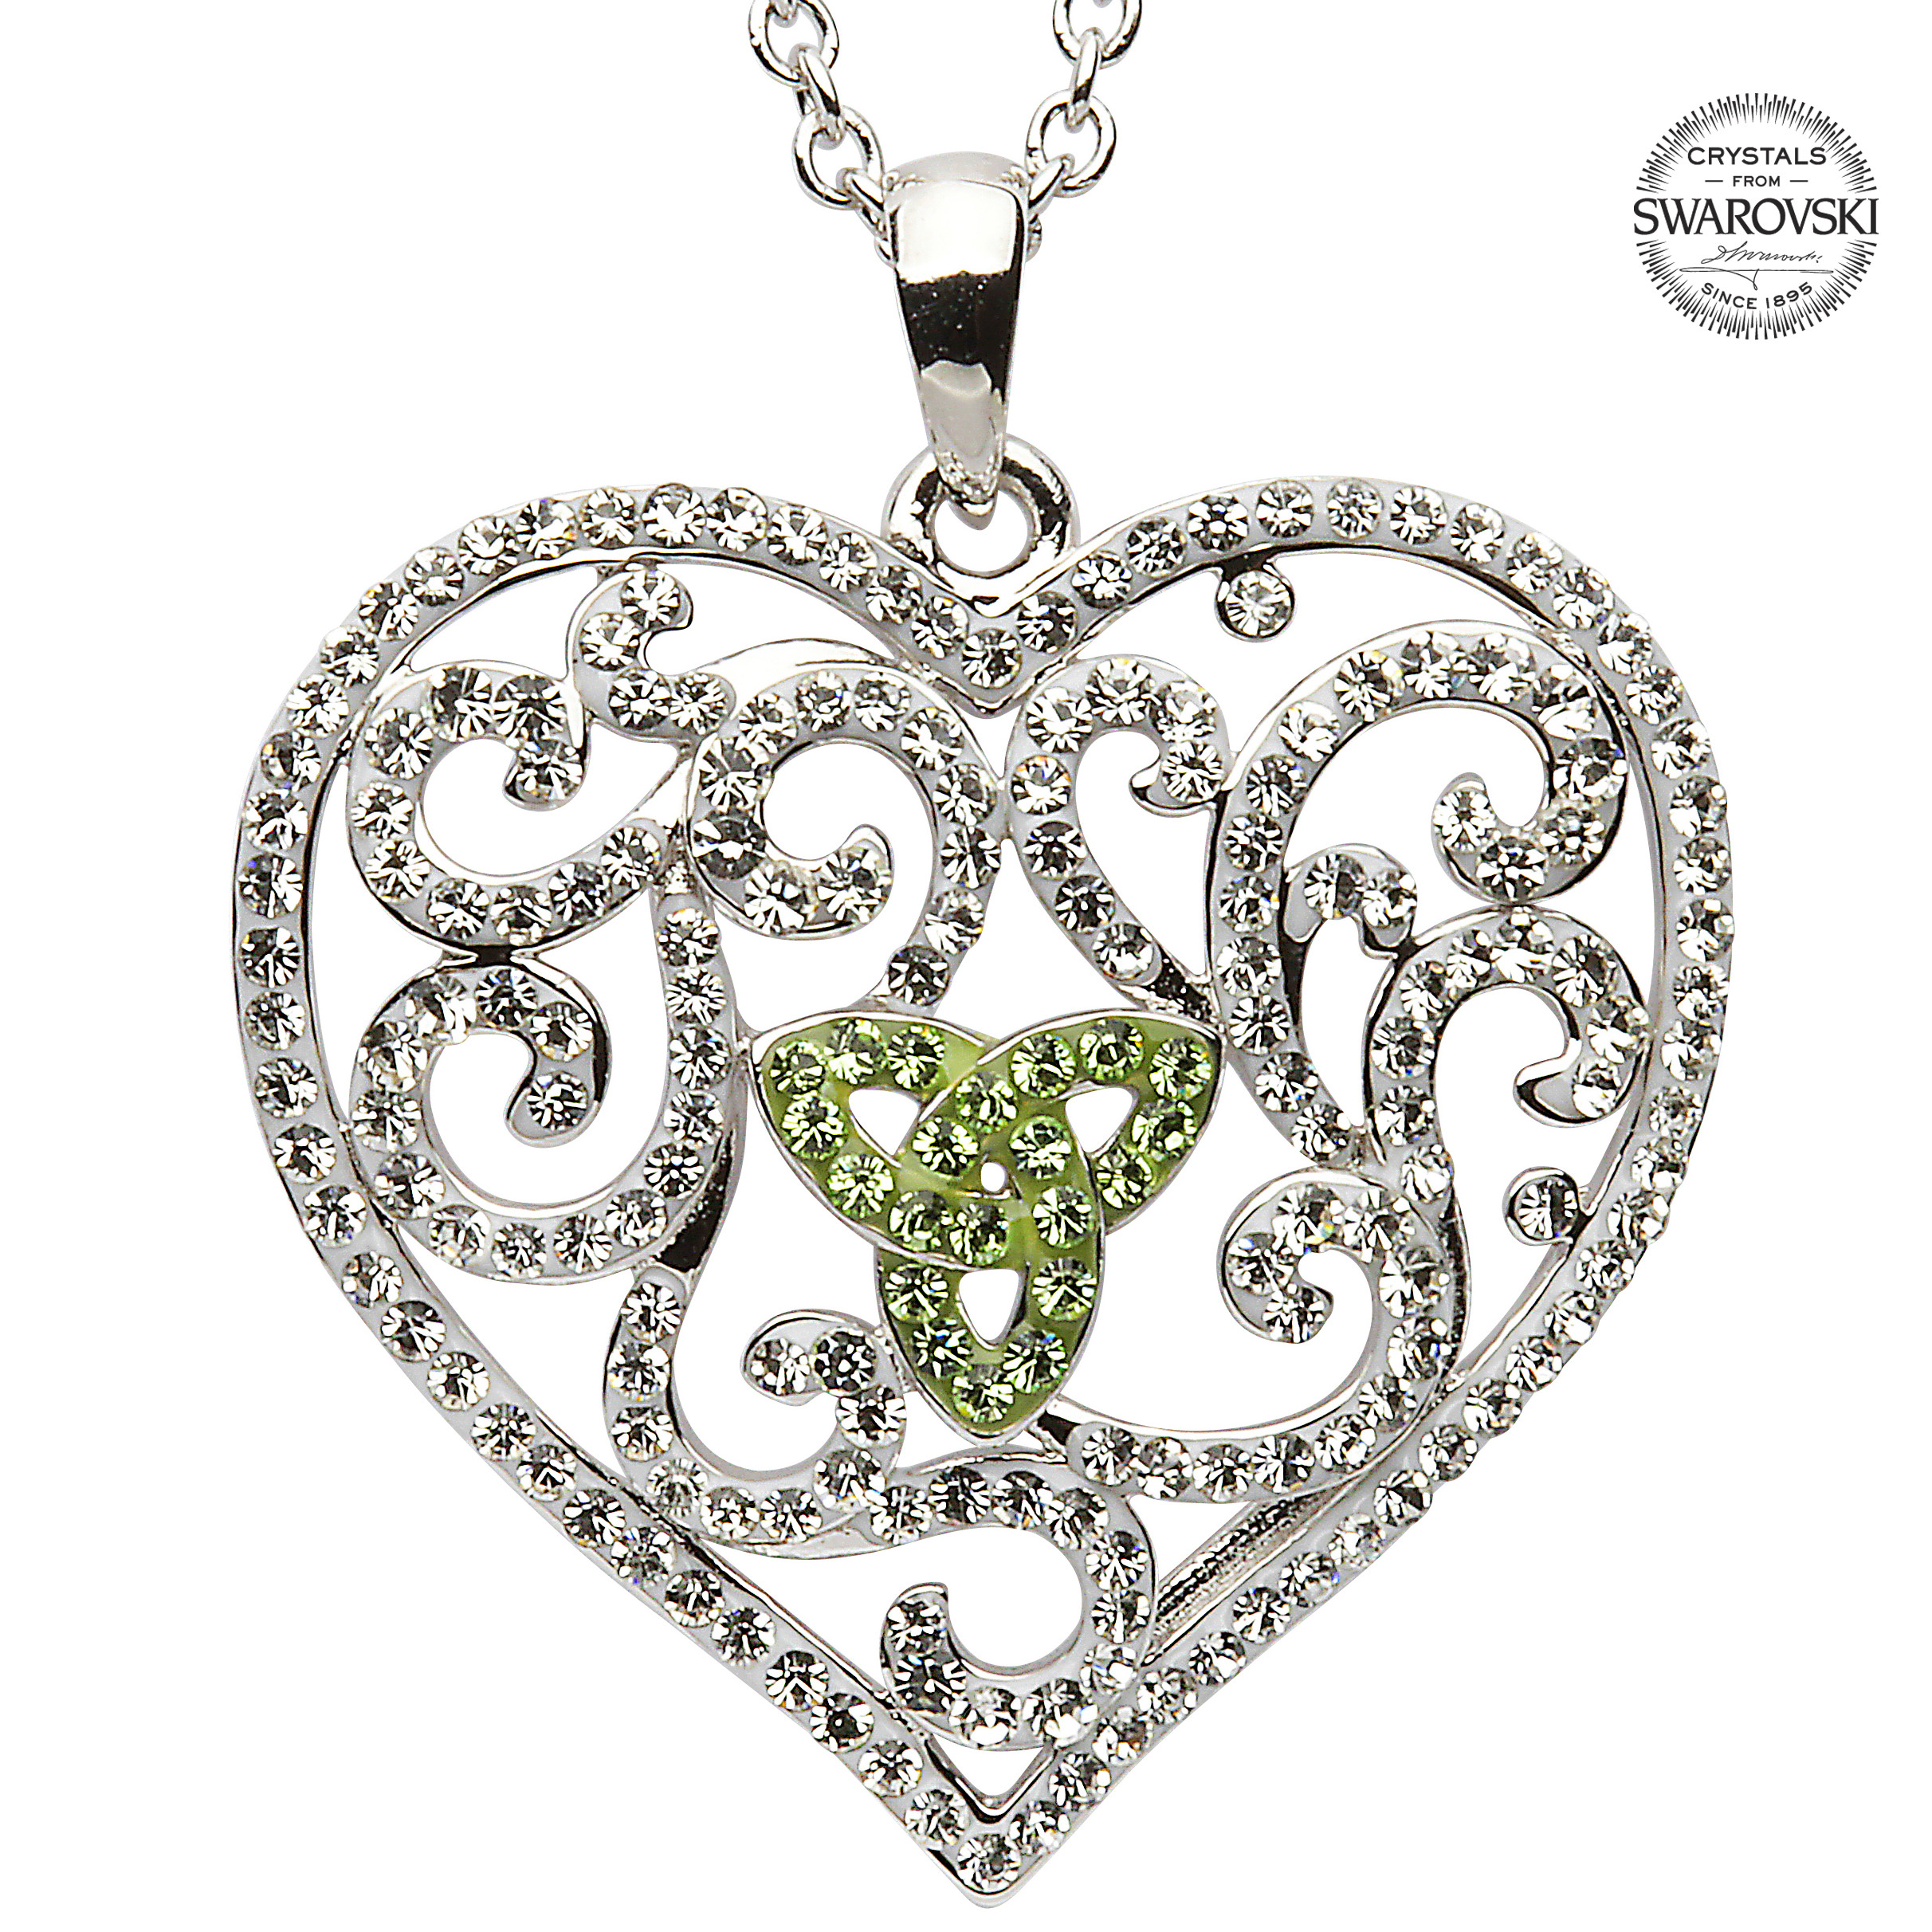 Product image for Irish Necklace Trinity Knot Heart Pendant with Green Swarovski Crystals Sterling Silver